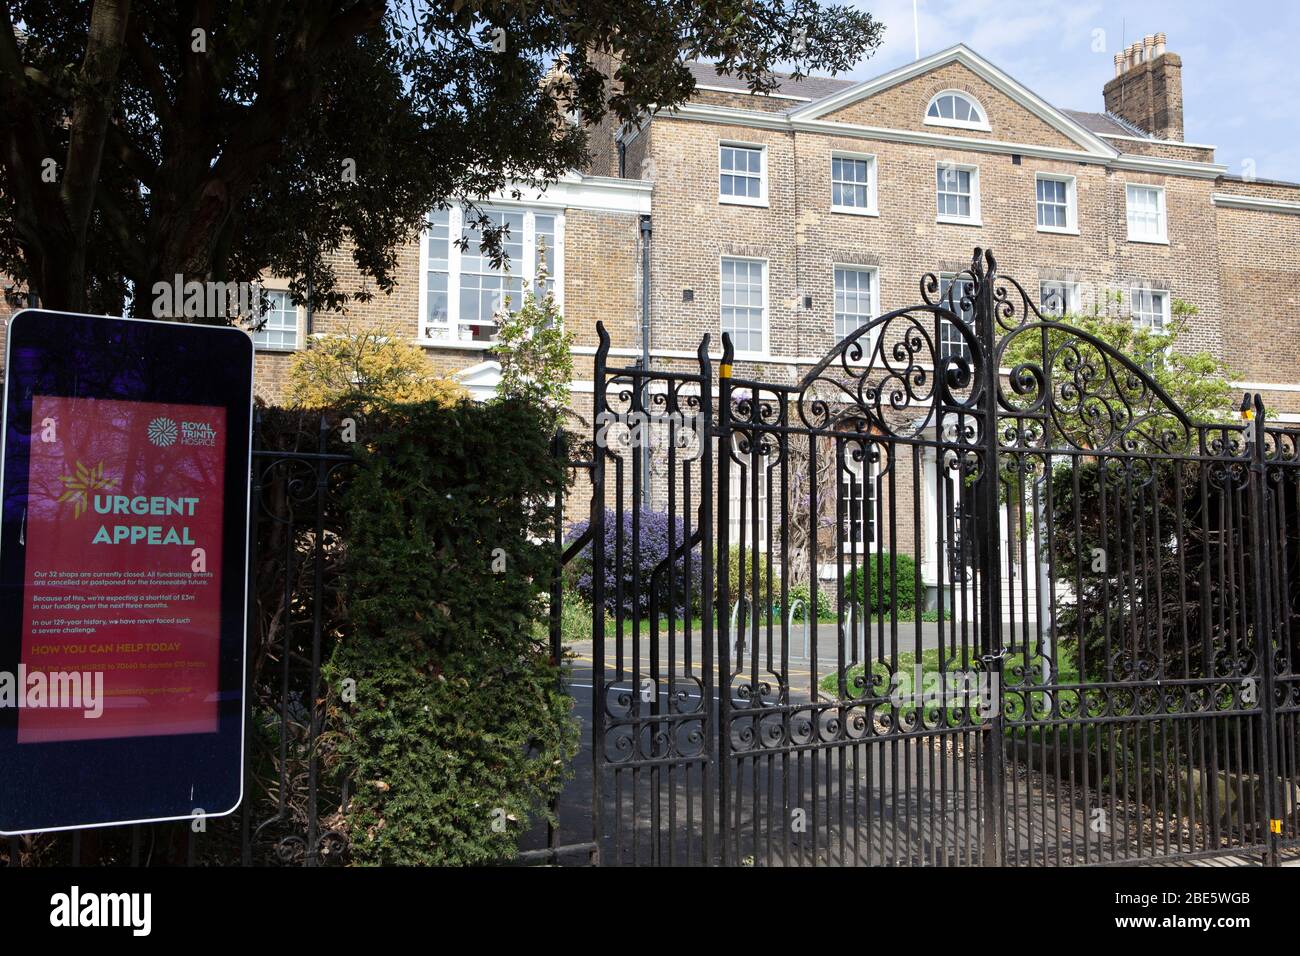 London, UK, 12 April 2020: Royal Trinity Hospice in Clapham, south London, has signs displaying corona virus information and appeals for financial support. With all their chairty shops closed and other revenue streams such as open gardens and sponsored walks not allowed, charities face severe short-falls in their fundraising because of the coronavirus. Anna Watson/Alamy Live News Stock Photo